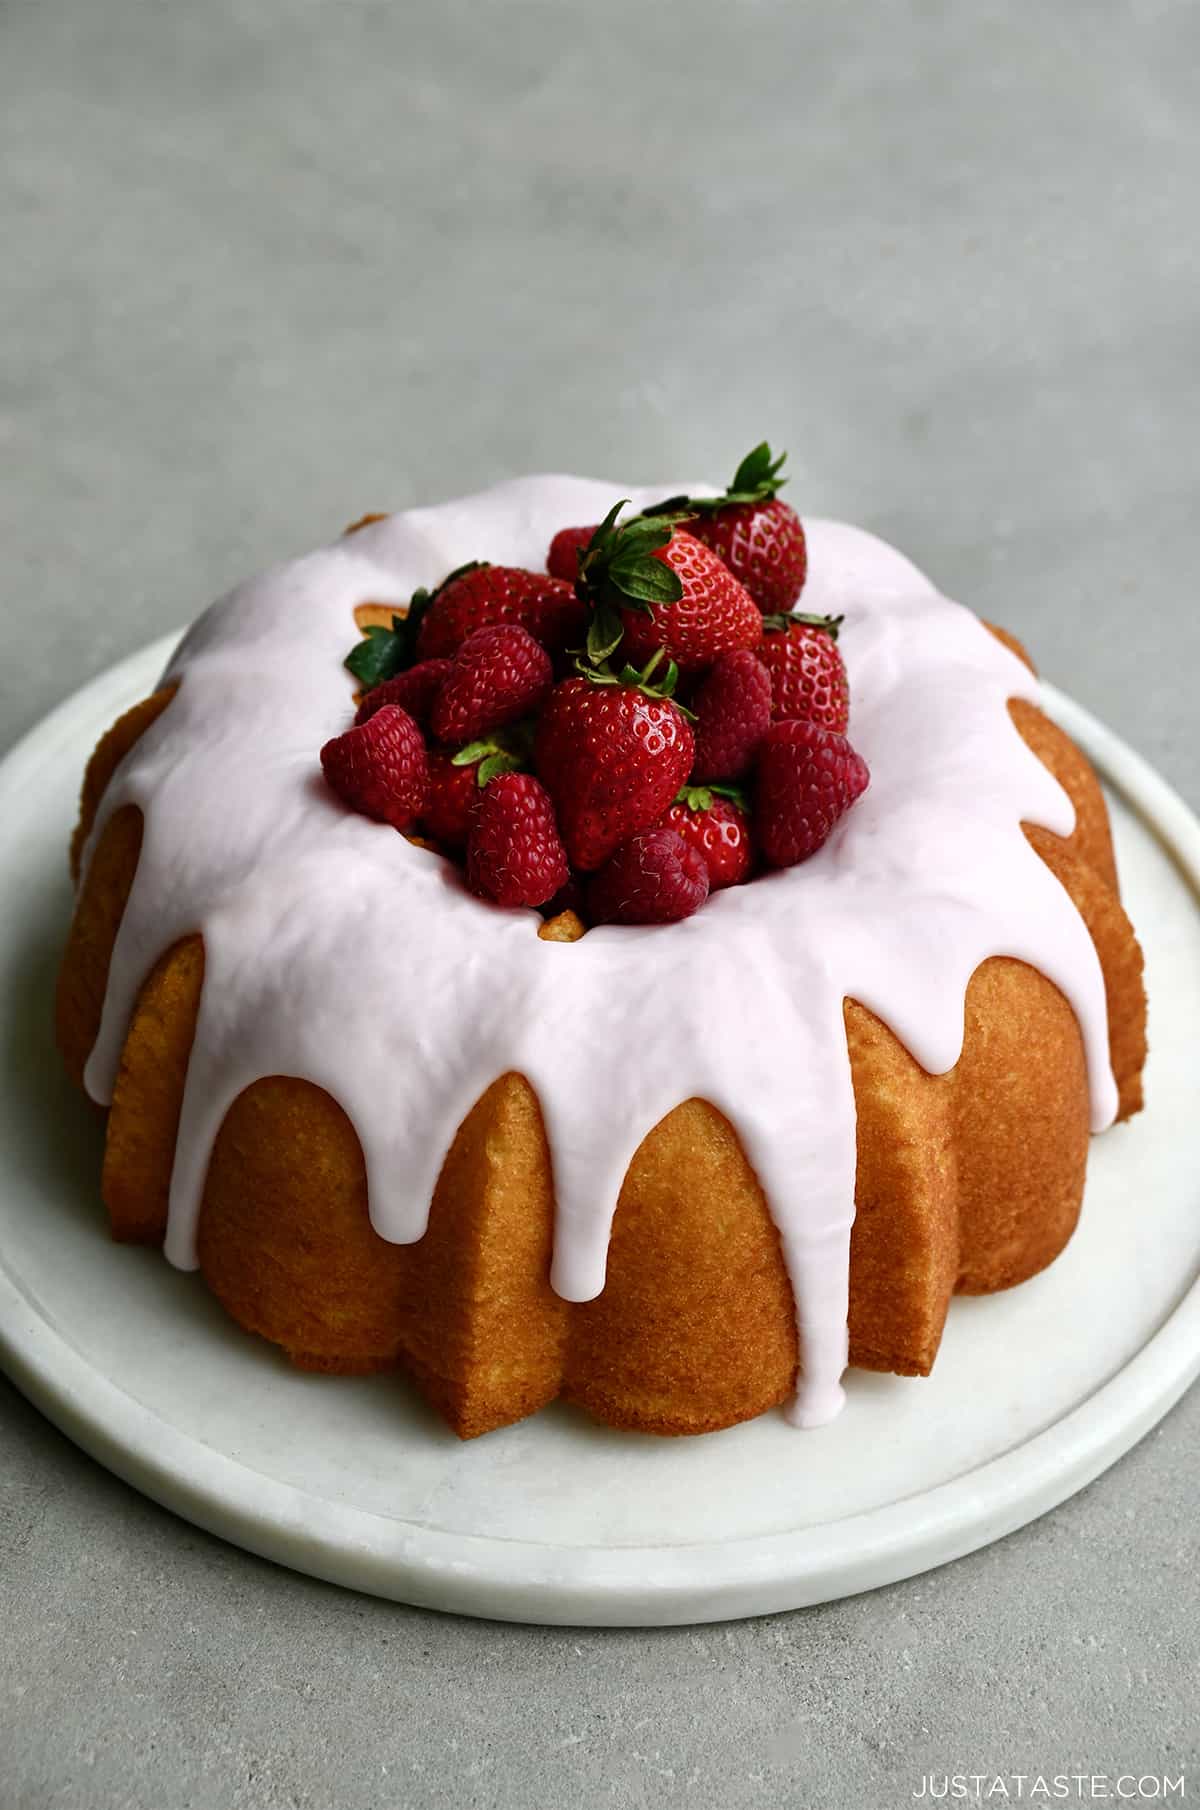 A lemon bundt cake with strawberry glaze and fresh strawberries in the center.